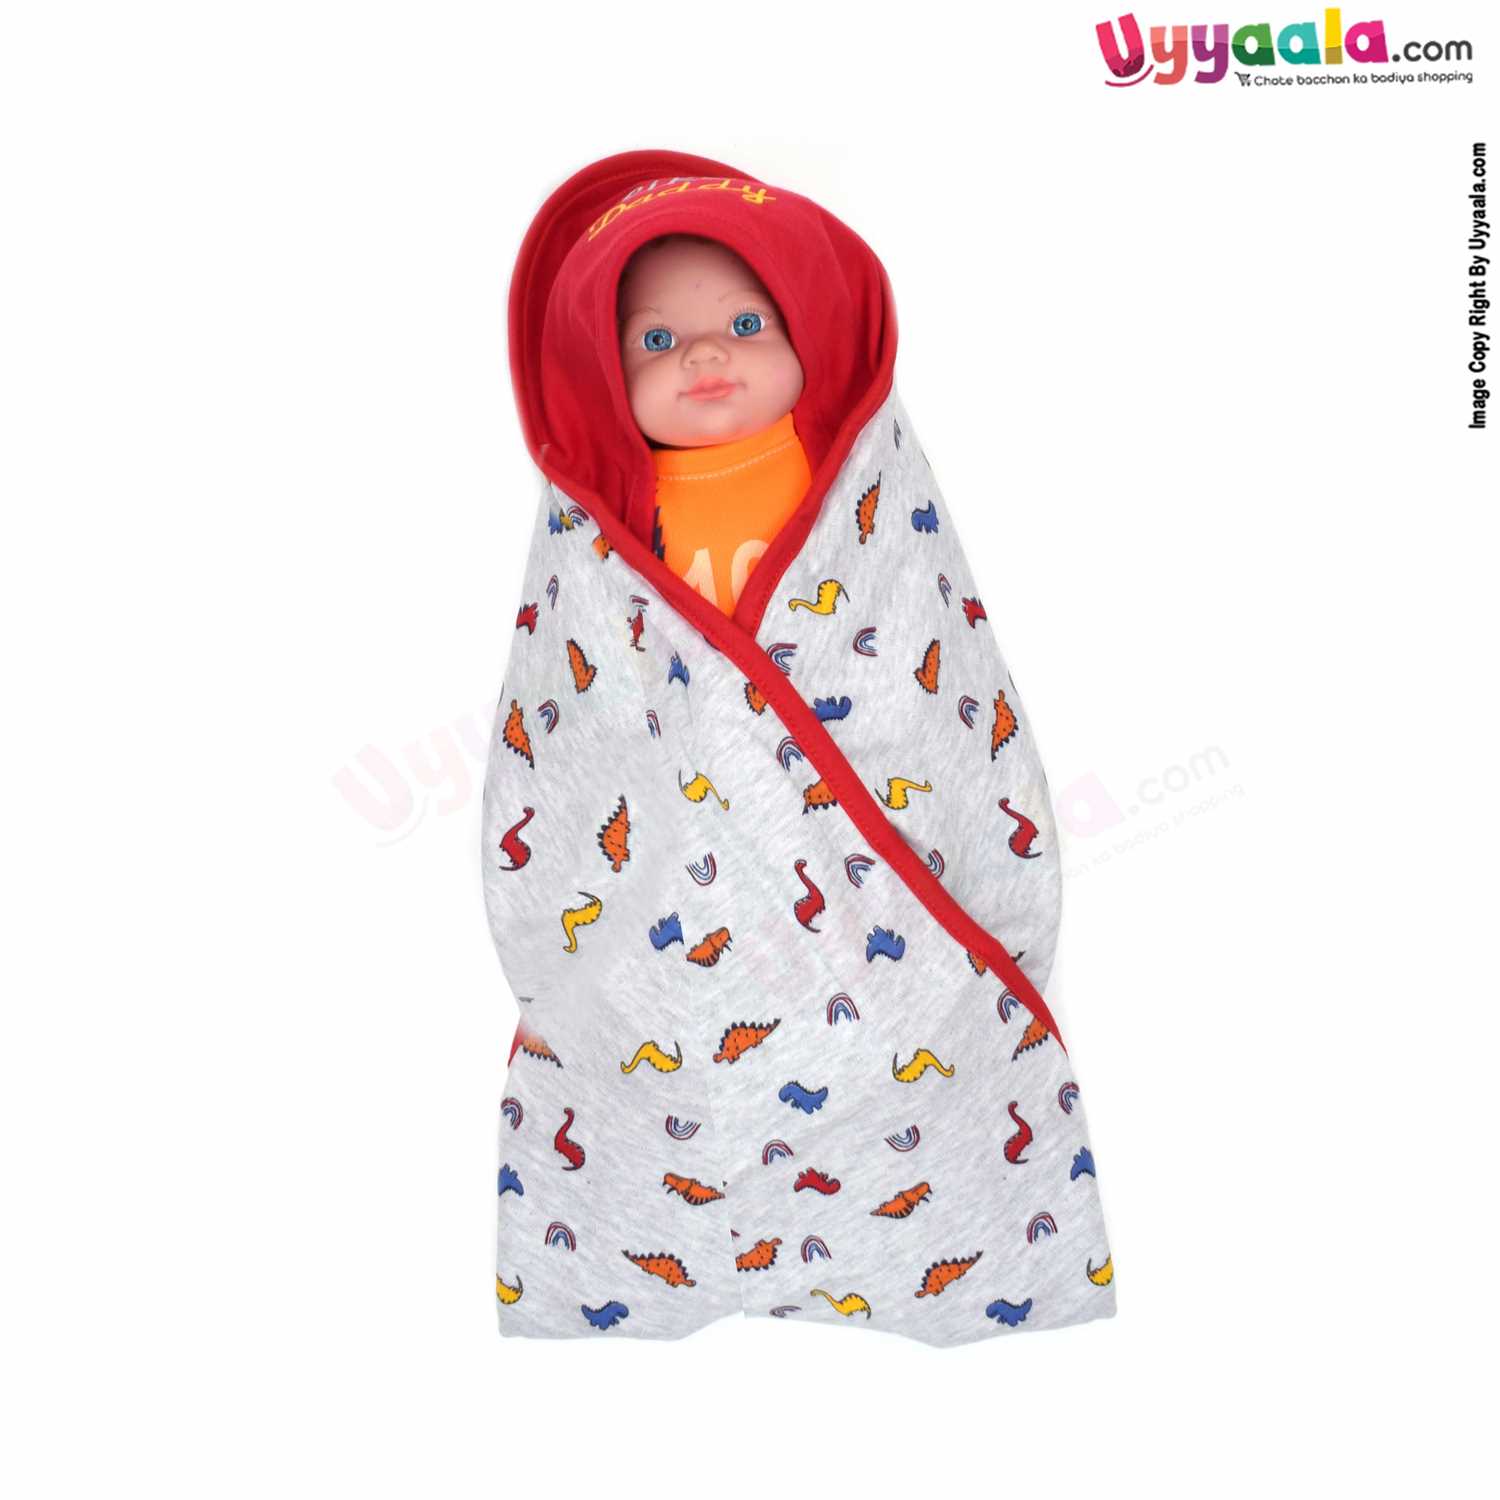 PRECIOUS ONE Baby Hooded Towel Premium Double Layered ,100% Cotton Hosiery with Dinosaurs Print 0+m Age, Size (88*72) Grey & Red